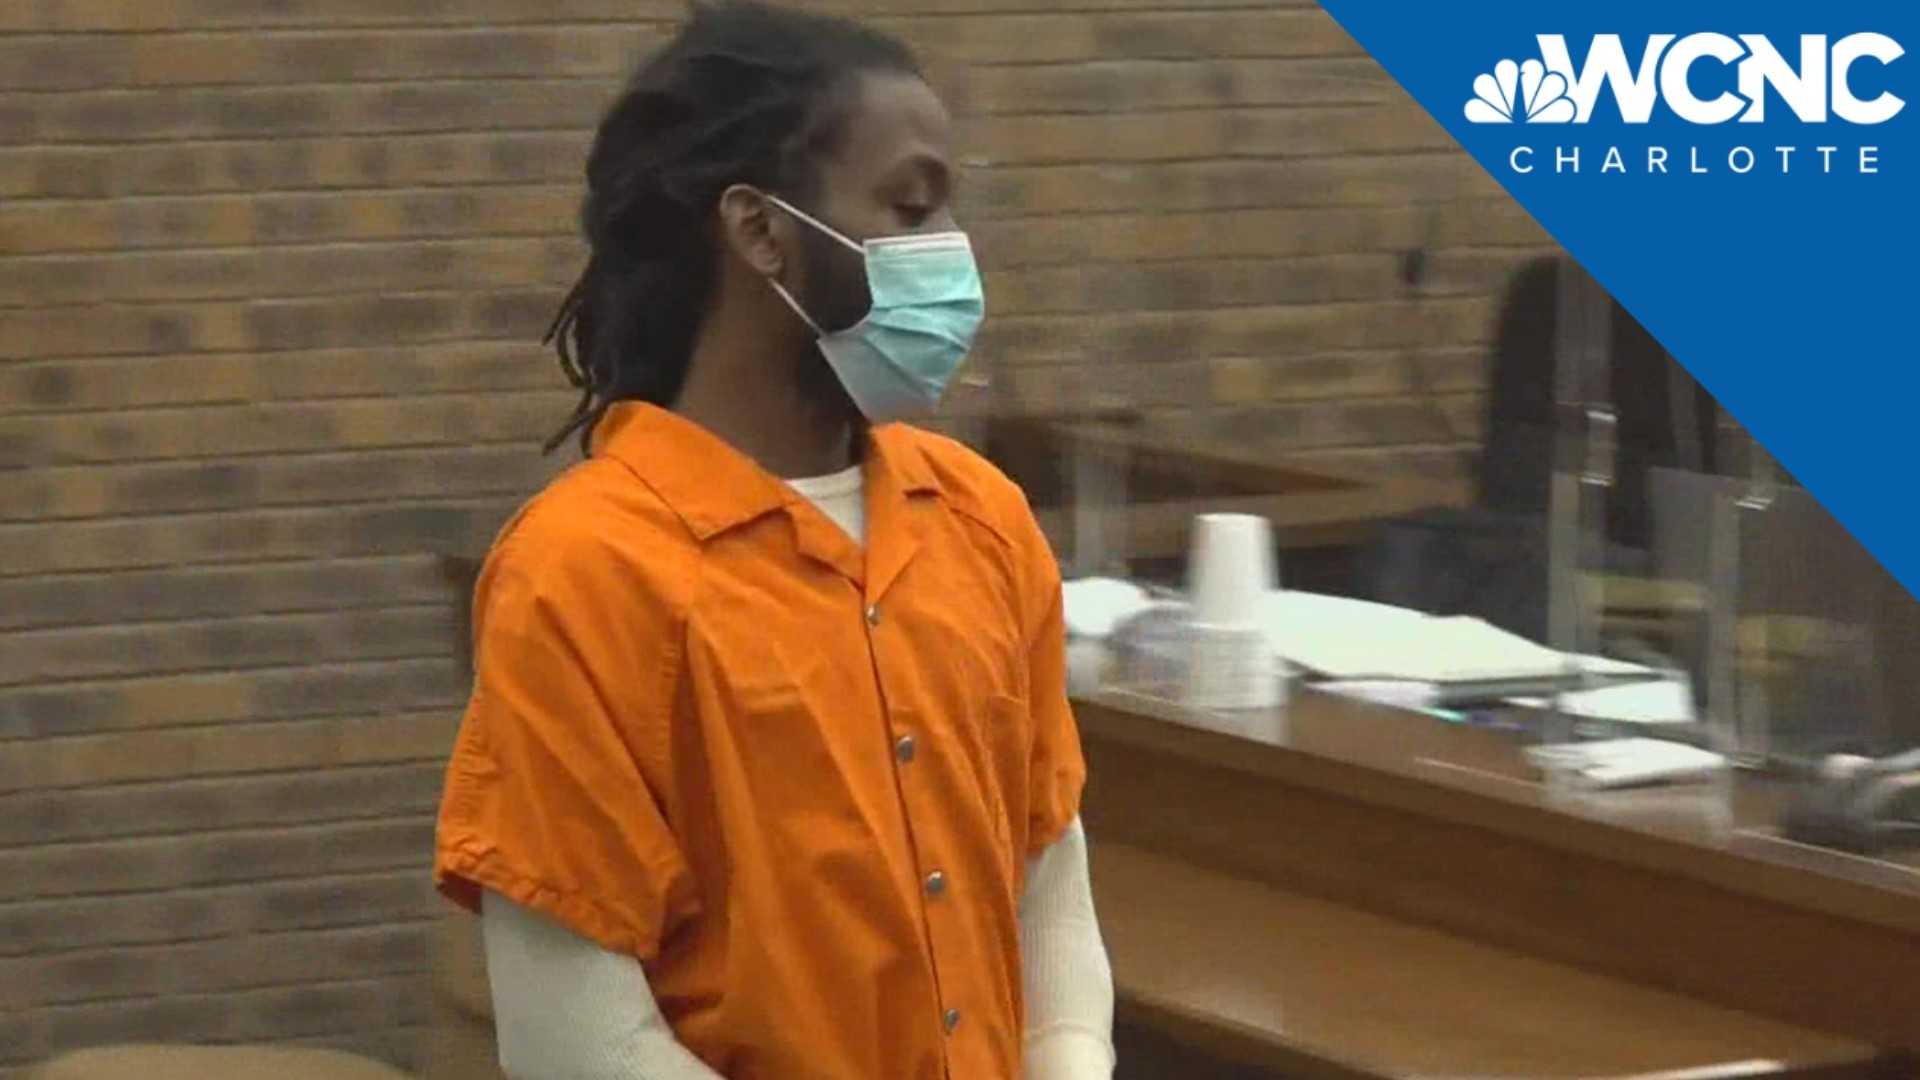 Emanuel Bedford's bond was denied this afternoon in Chesterfield County. He's charged with the murder of Deidre Reid.